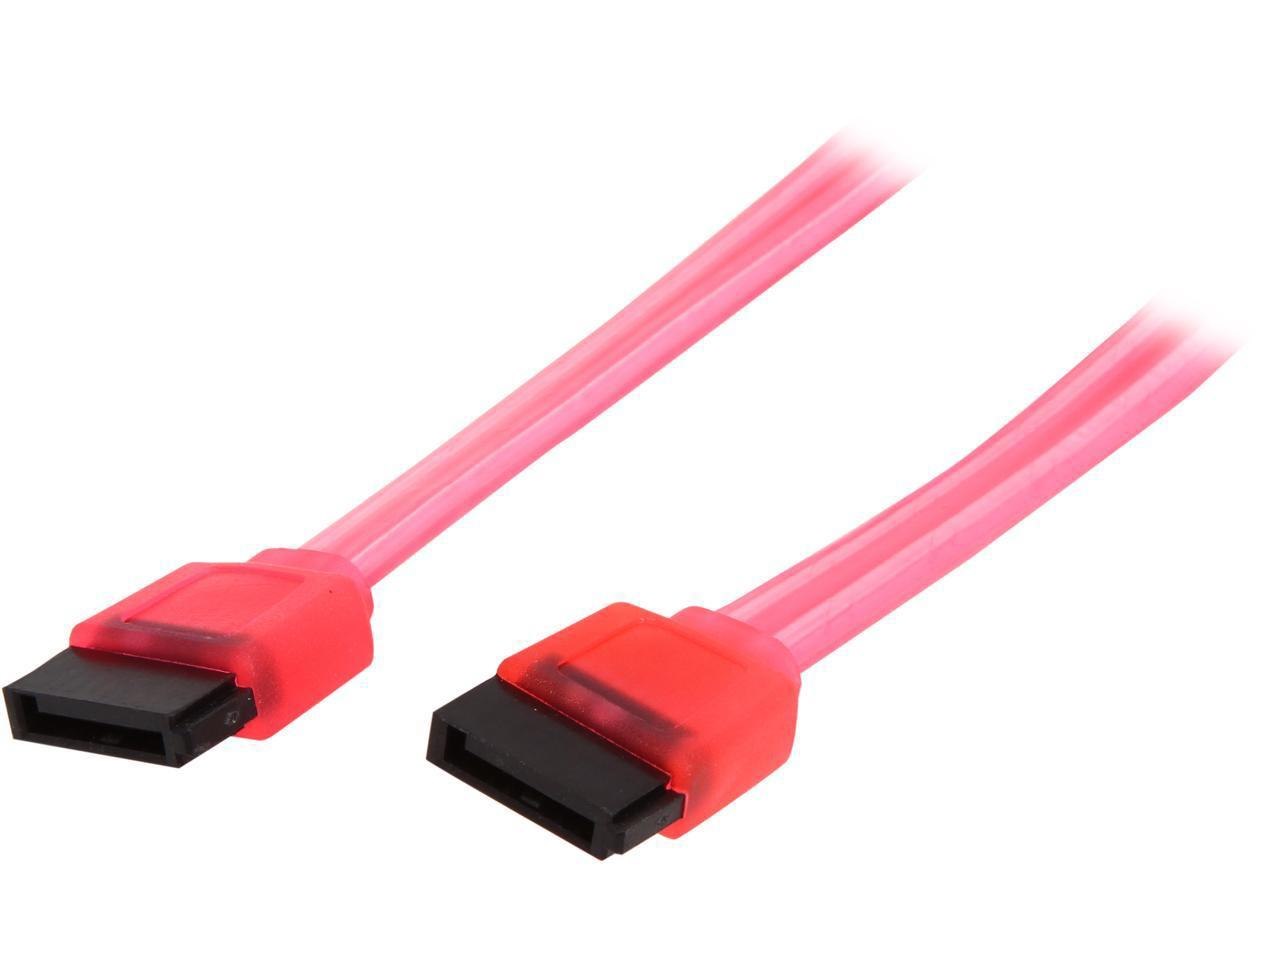 Nippon Labs Sata3-Ins-6-Ll-Rd 6.0Gbit/s Sata3 Type L To Sata3 Type L Internal Shielded Cable Uv Red